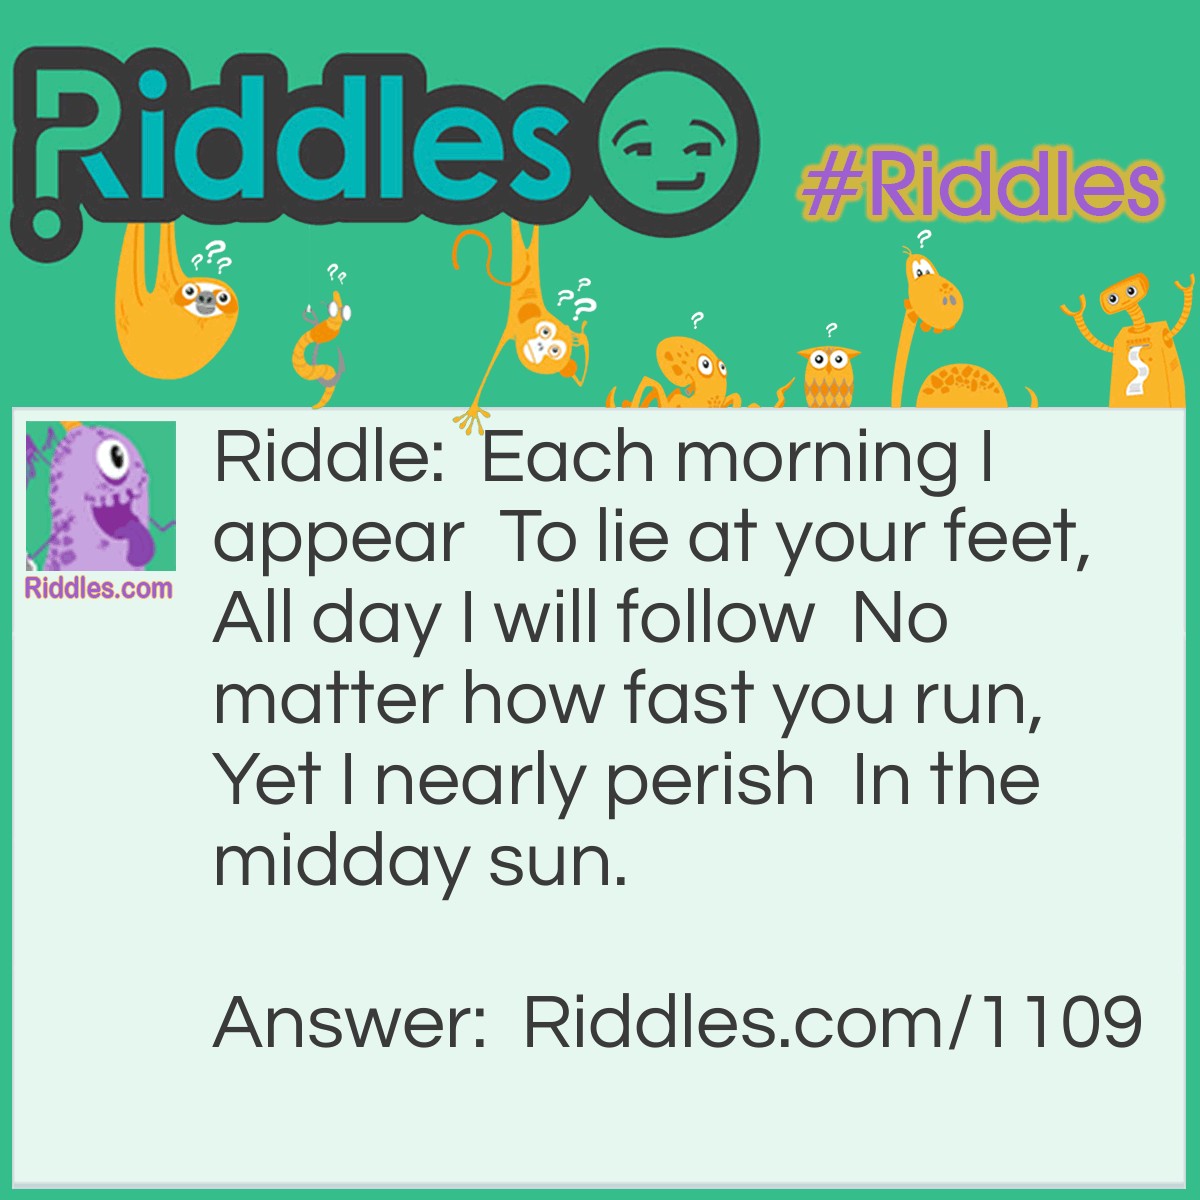 Riddle: Each morning I appear  To lie at your feet,  All-day I will follow  No matter how fast you run,  Yet I nearly perish  In the midday sun. What am I? Answer: A shadow